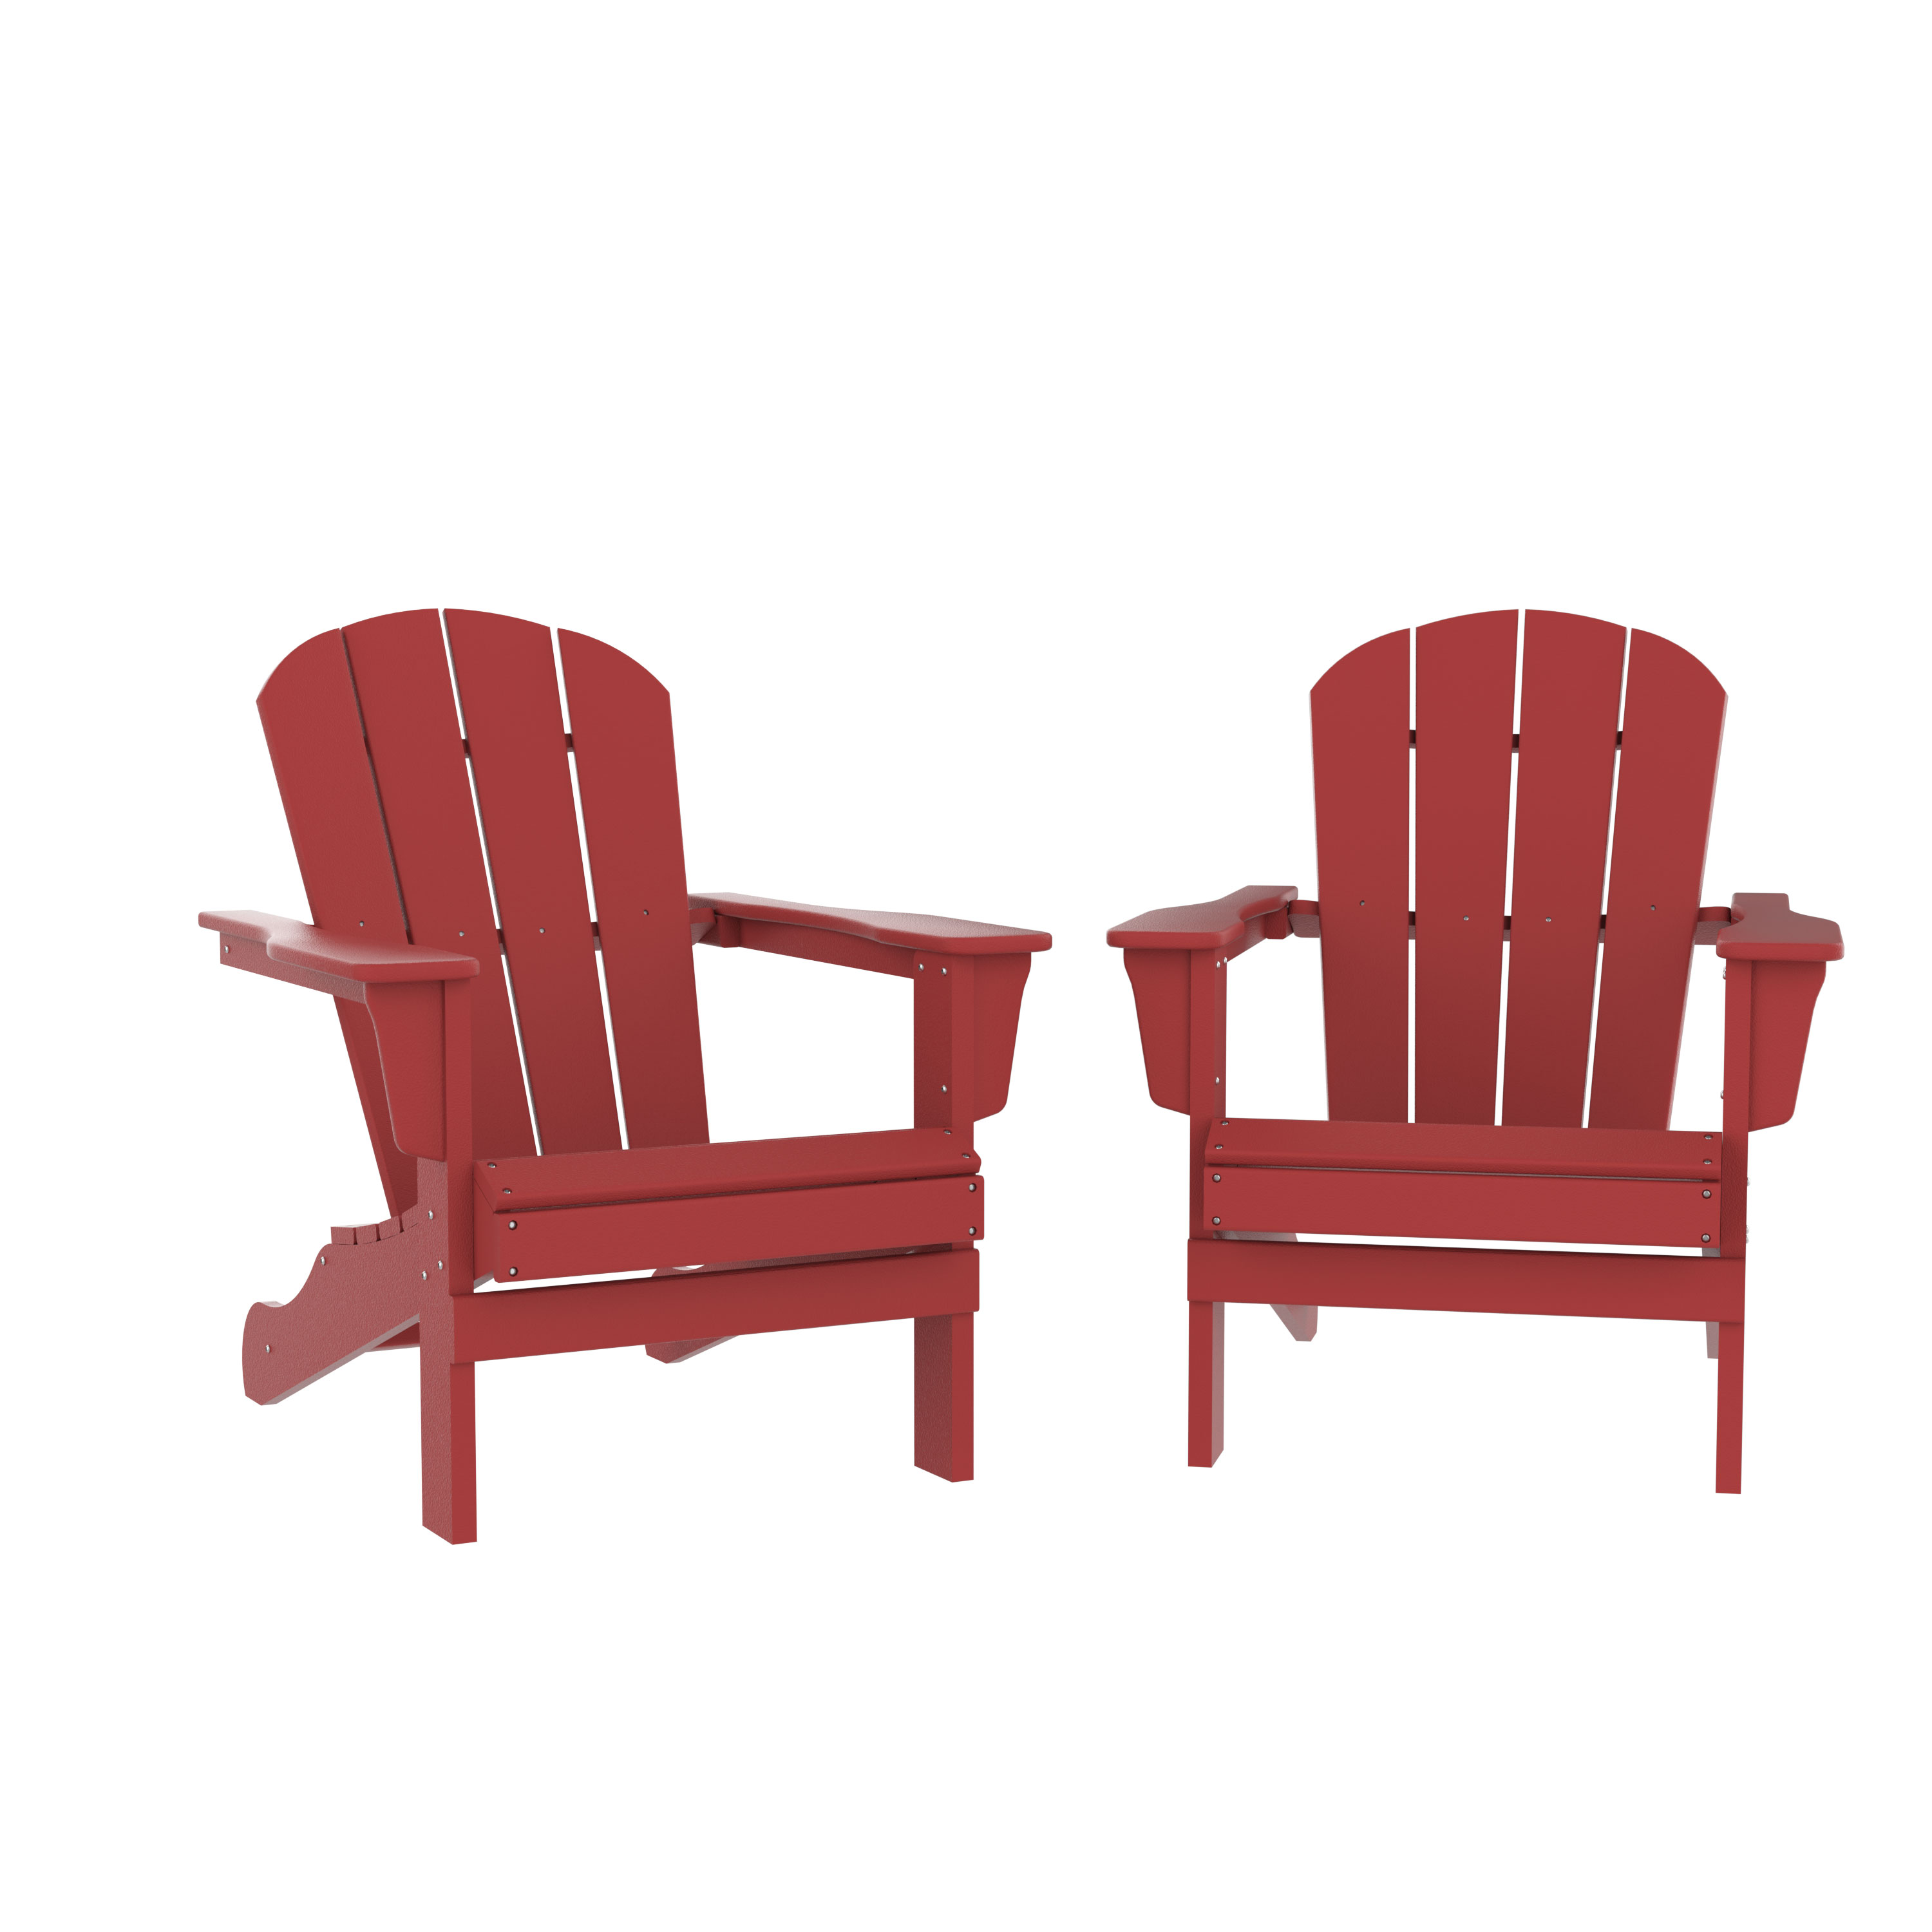 CoSoTower Adirondack Chair, Fire Pit Chairs, Sand Chair, Patio Outdoor Chairs, Dpe Plastic Resin Deck Chair, Lawn Chairs, Adult Size, Weather Resistant For Patio/ Backyard/Garden, Red, Set Of 2 - image 4 of 6